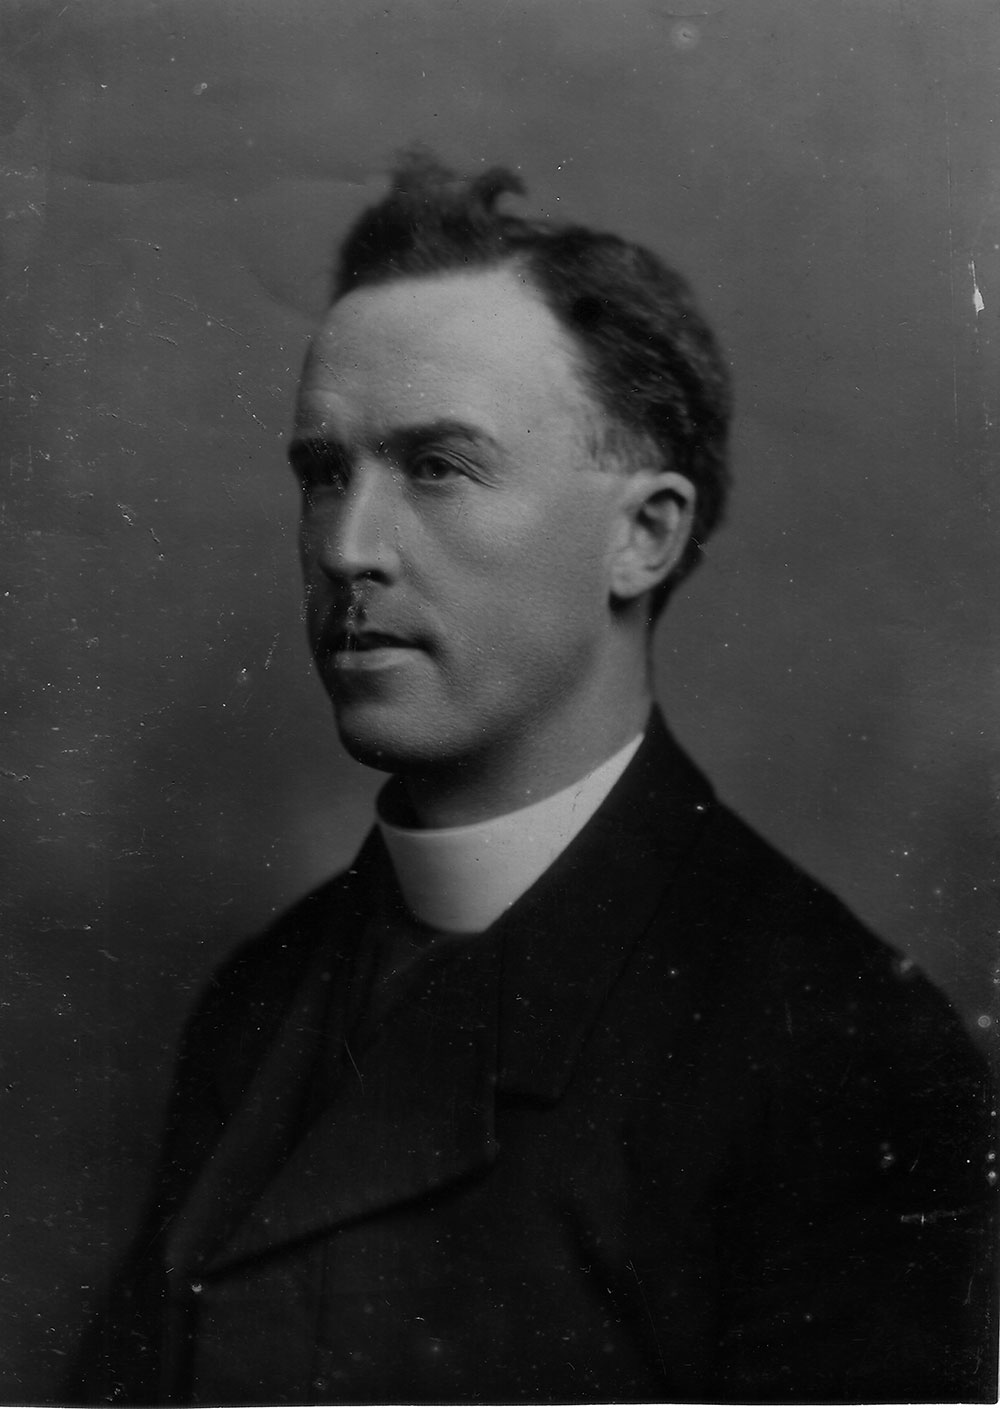 A portrait of Fr. O'Flanagan taken during his American mission.